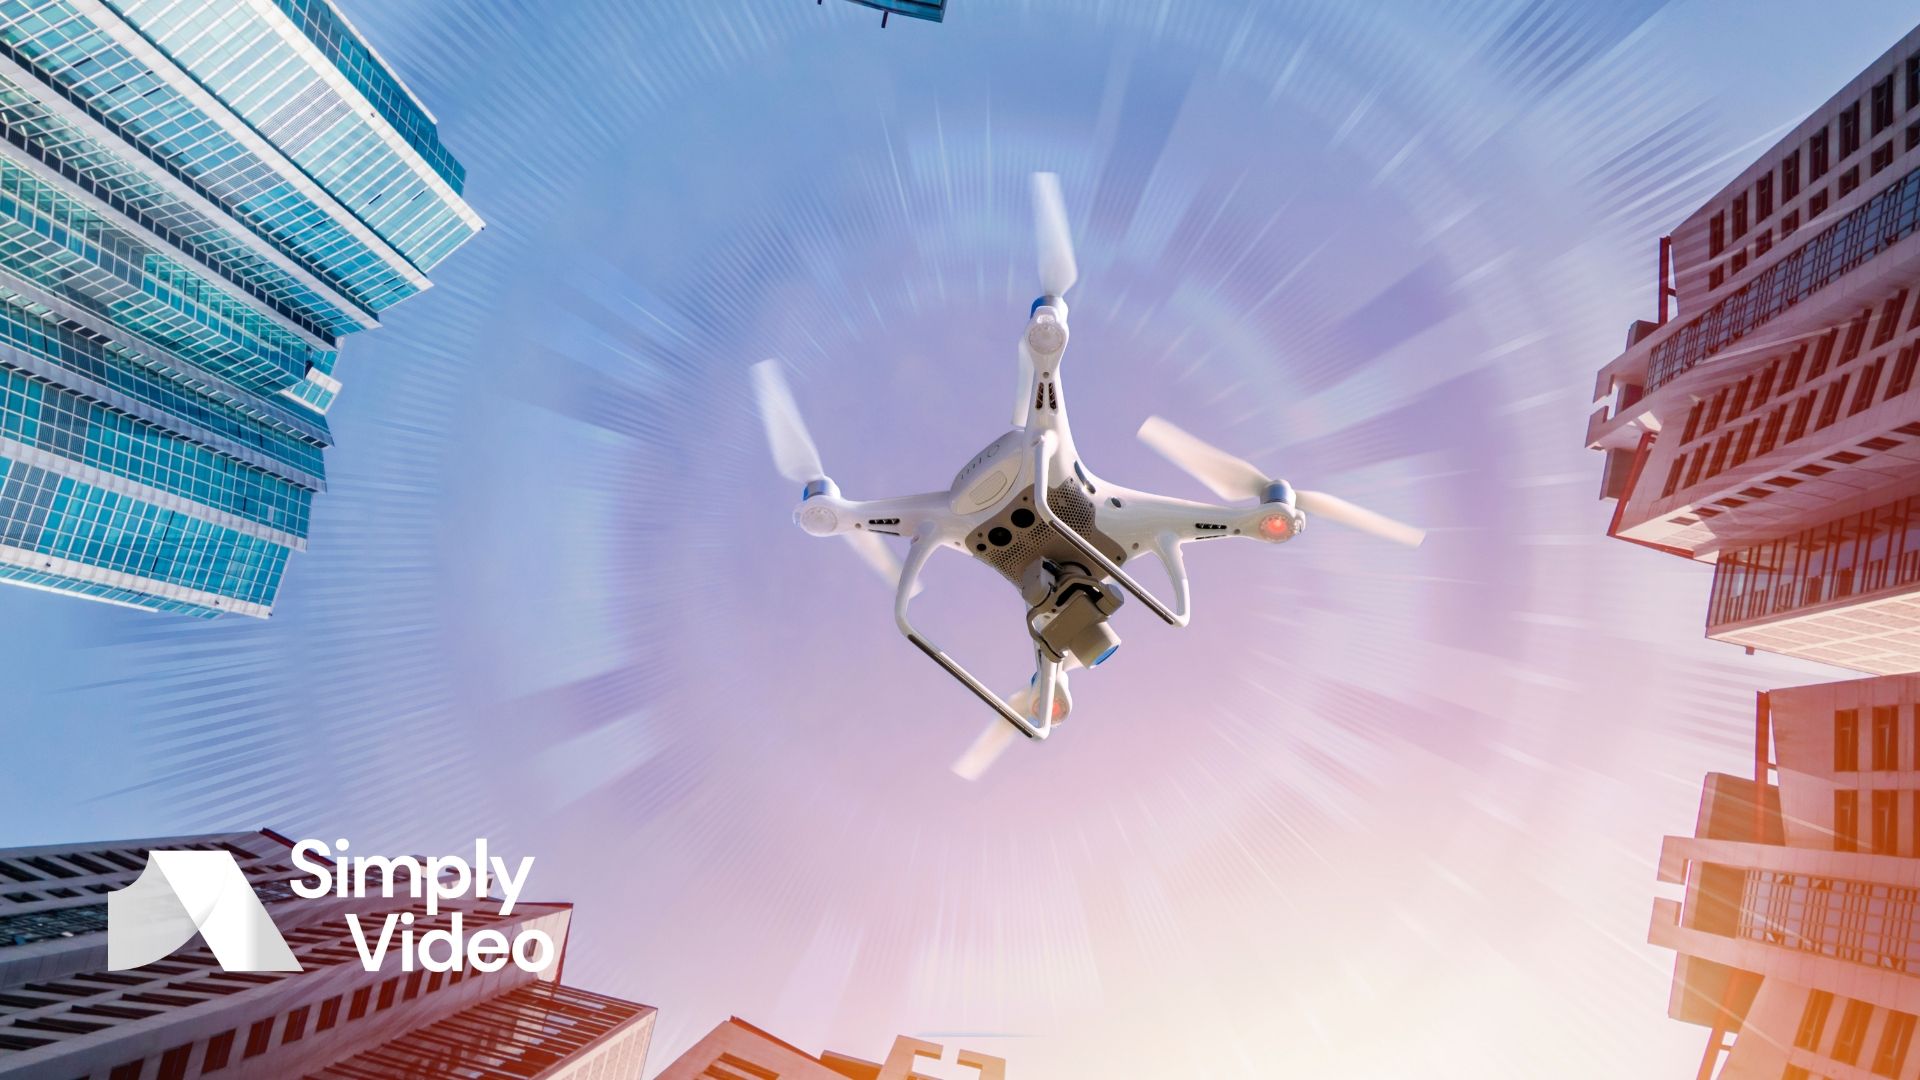 Drones aren't just mindless robots. With some clever software, they can become productive, collaborative members of your team. Learn how in our guide.